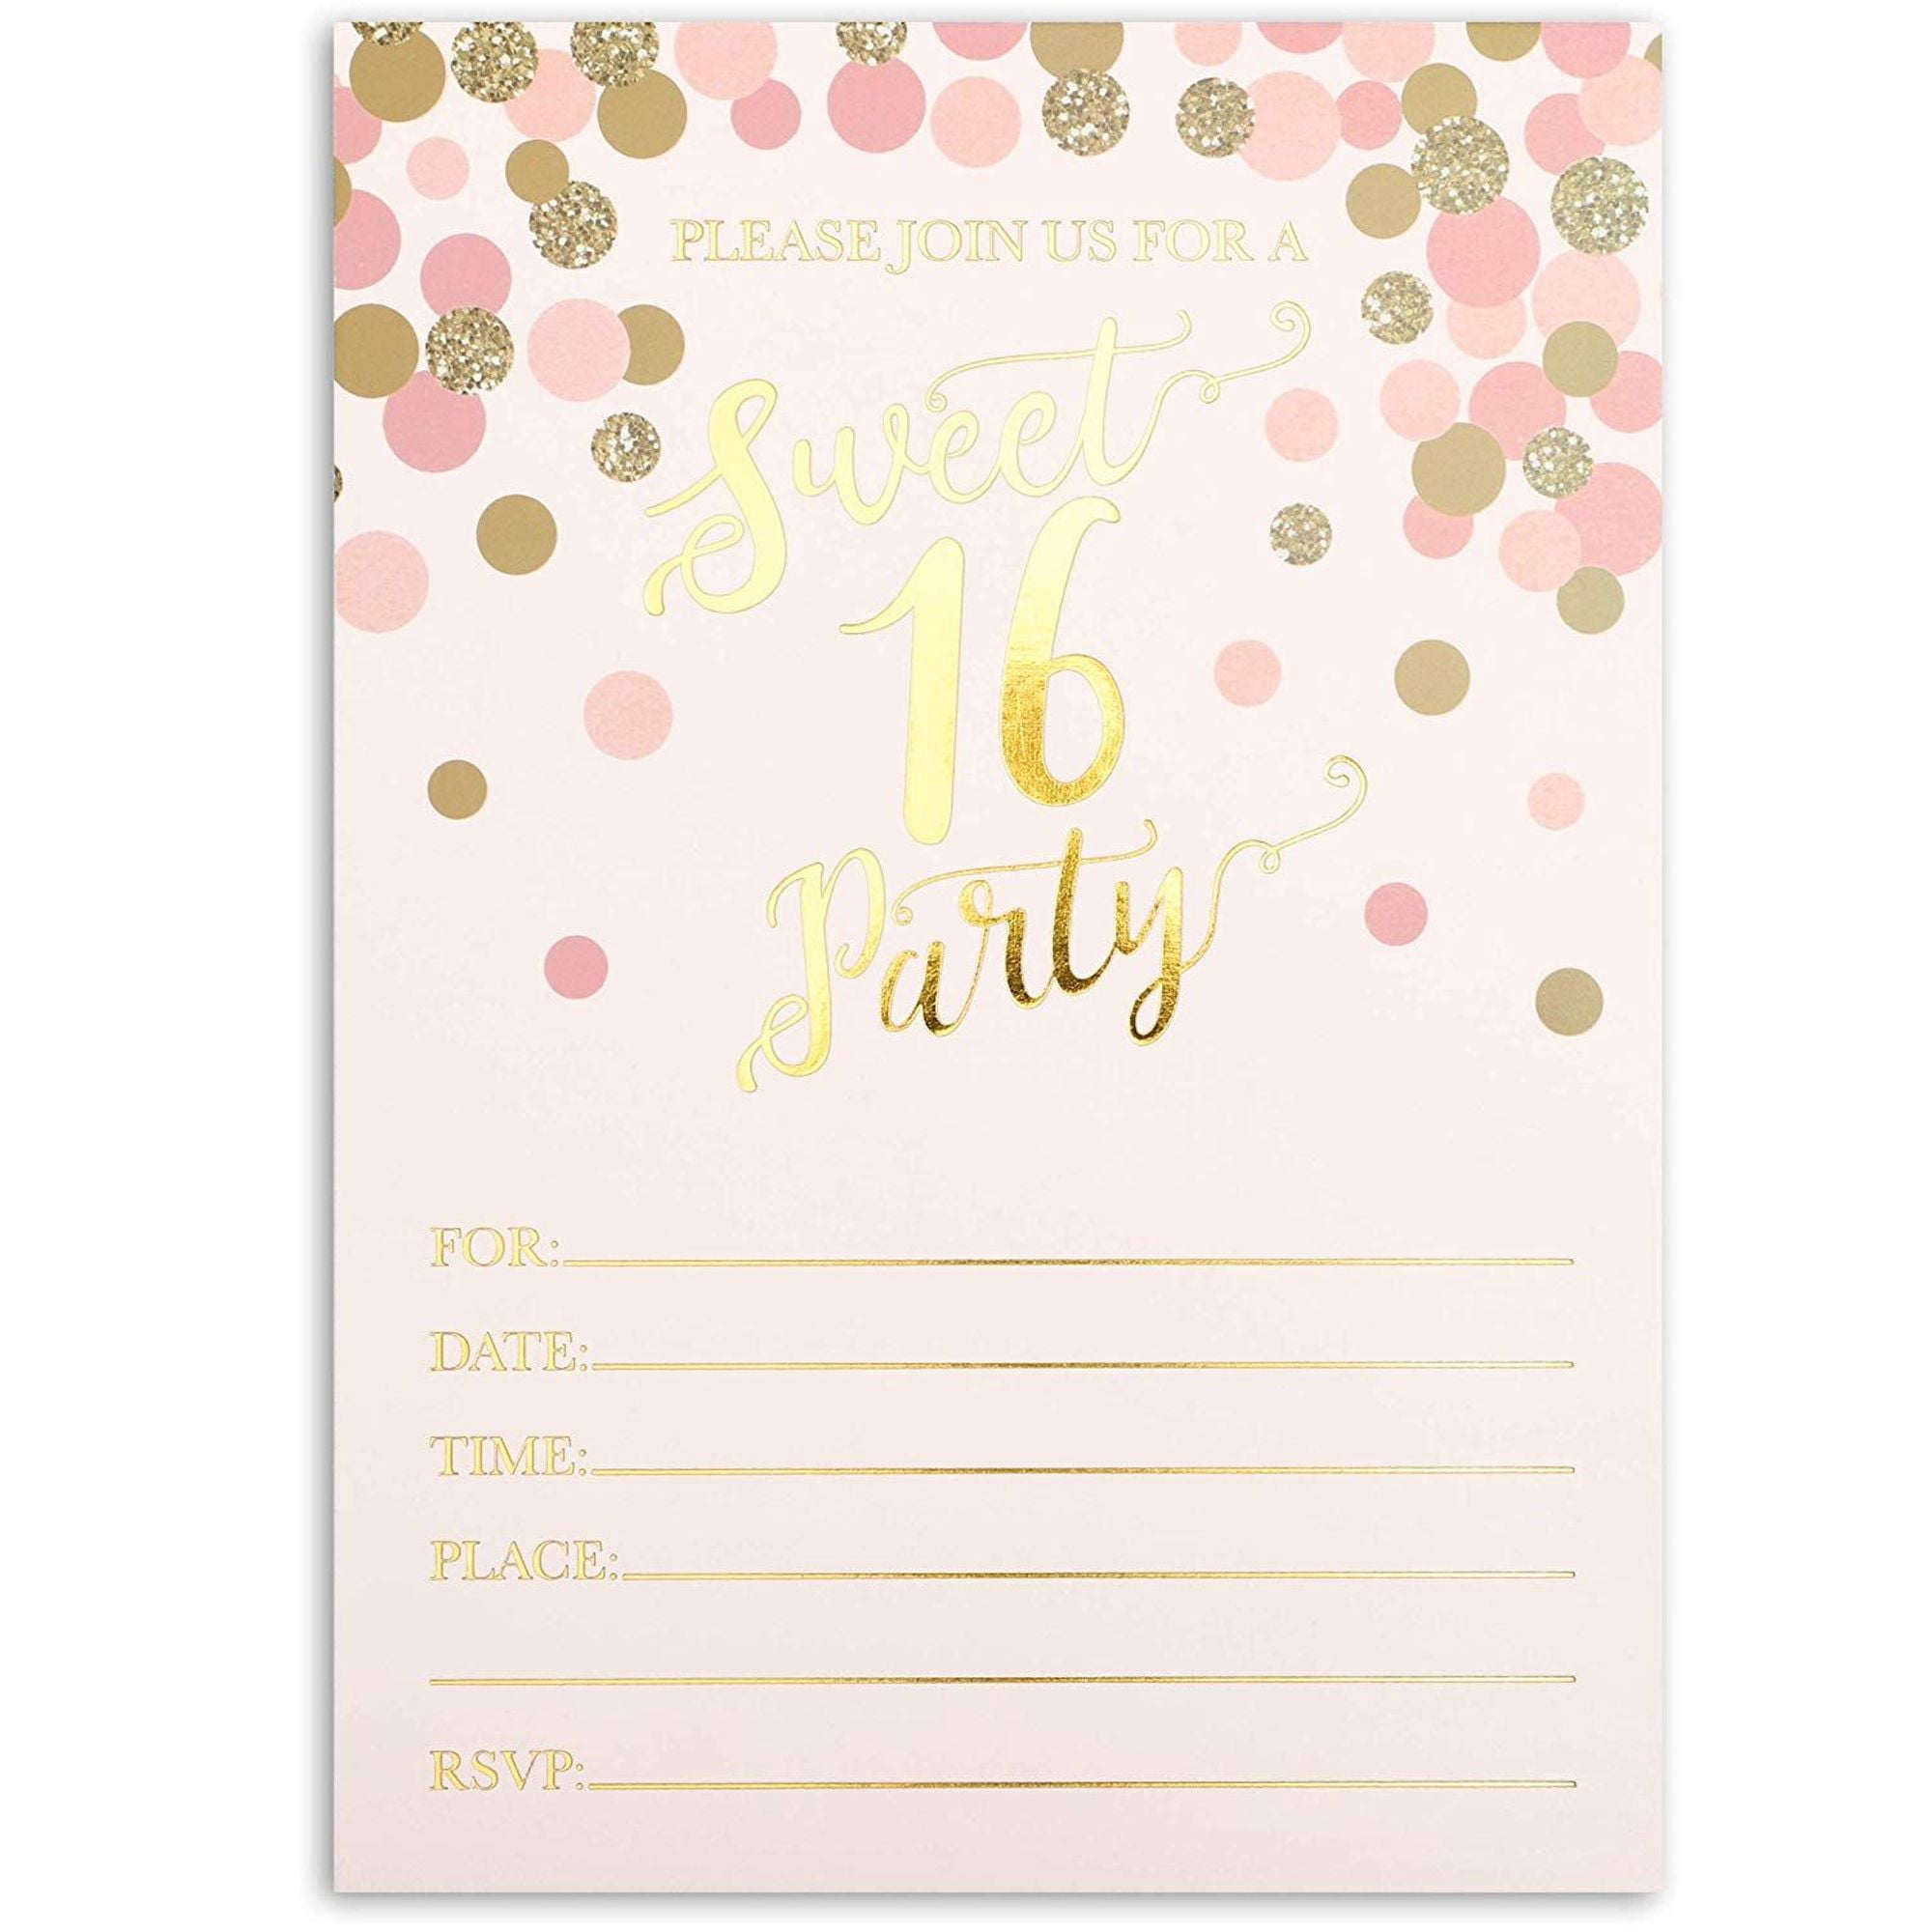 SWEET 16 SIXTEEN BIRTHDAY PARTY INVITATIONS & THANK YOU CARD SET 20 CARDS